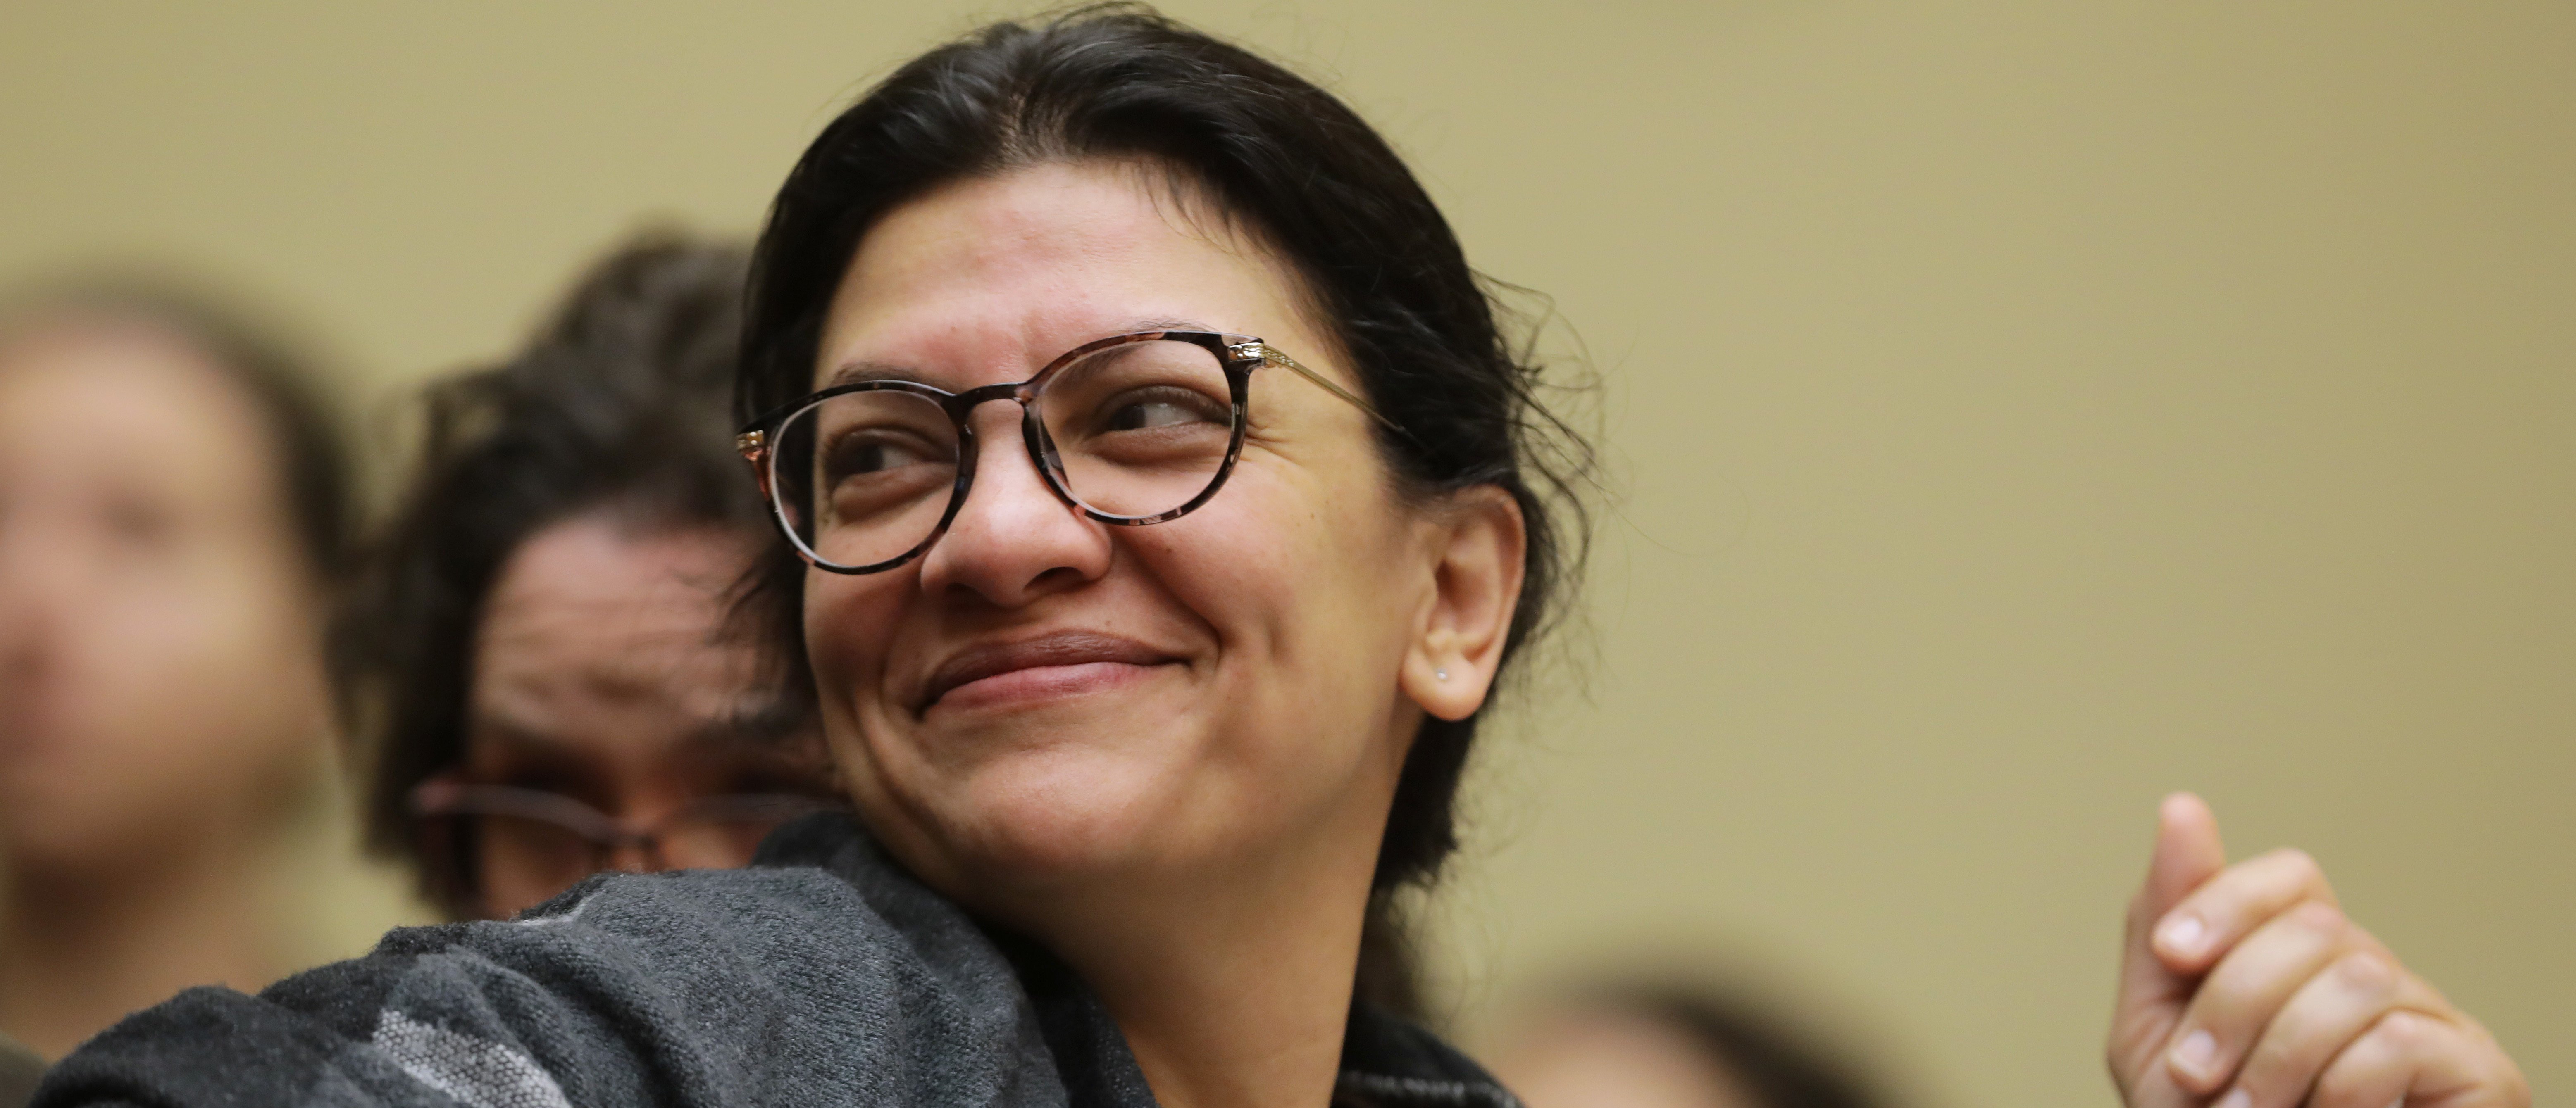 WASHINGTON, DC - JANUARY 09: House Oversight and Reform Committee member Rep. Rashida Tlaib (D-MI) attends a hearing about the 2020 census in the Rayburn House Office Building on Capitol Hill January 09, 2020 in Washington, DC. The committee heard testimony about 'hard-to-reach' communities and how the federal government could work to gather better census data from under-reported groups like Asian Americans, Native Americans, African Americans and recent immigrants. (Photo by Chip Somodevilla/Getty Images)